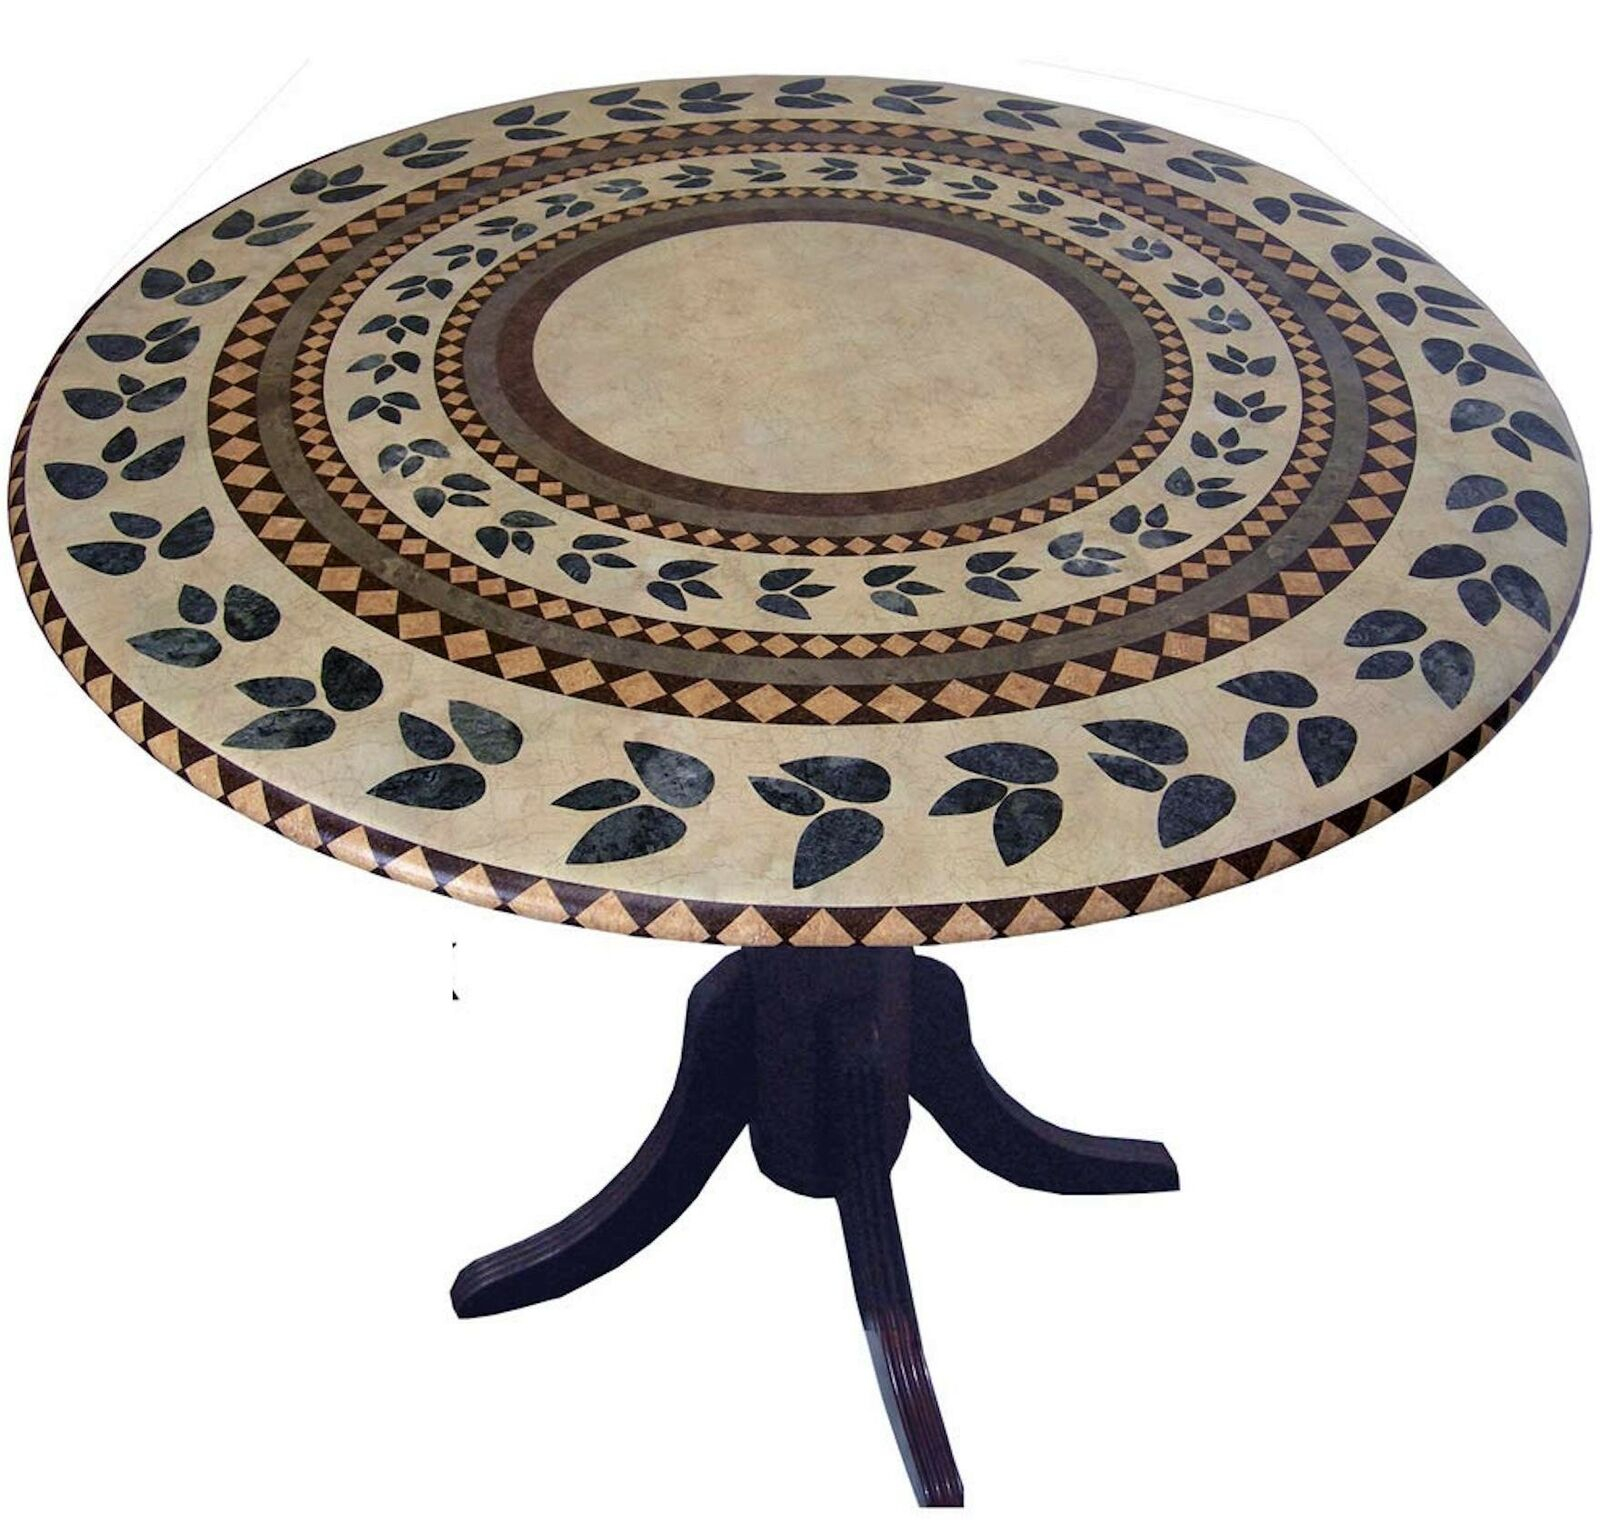 Mosaic Table Cloth Round 36 To 48 Elastic Edge Fitted Vinyl Table Cover Inl pertaining to measurements 1600 X 1524